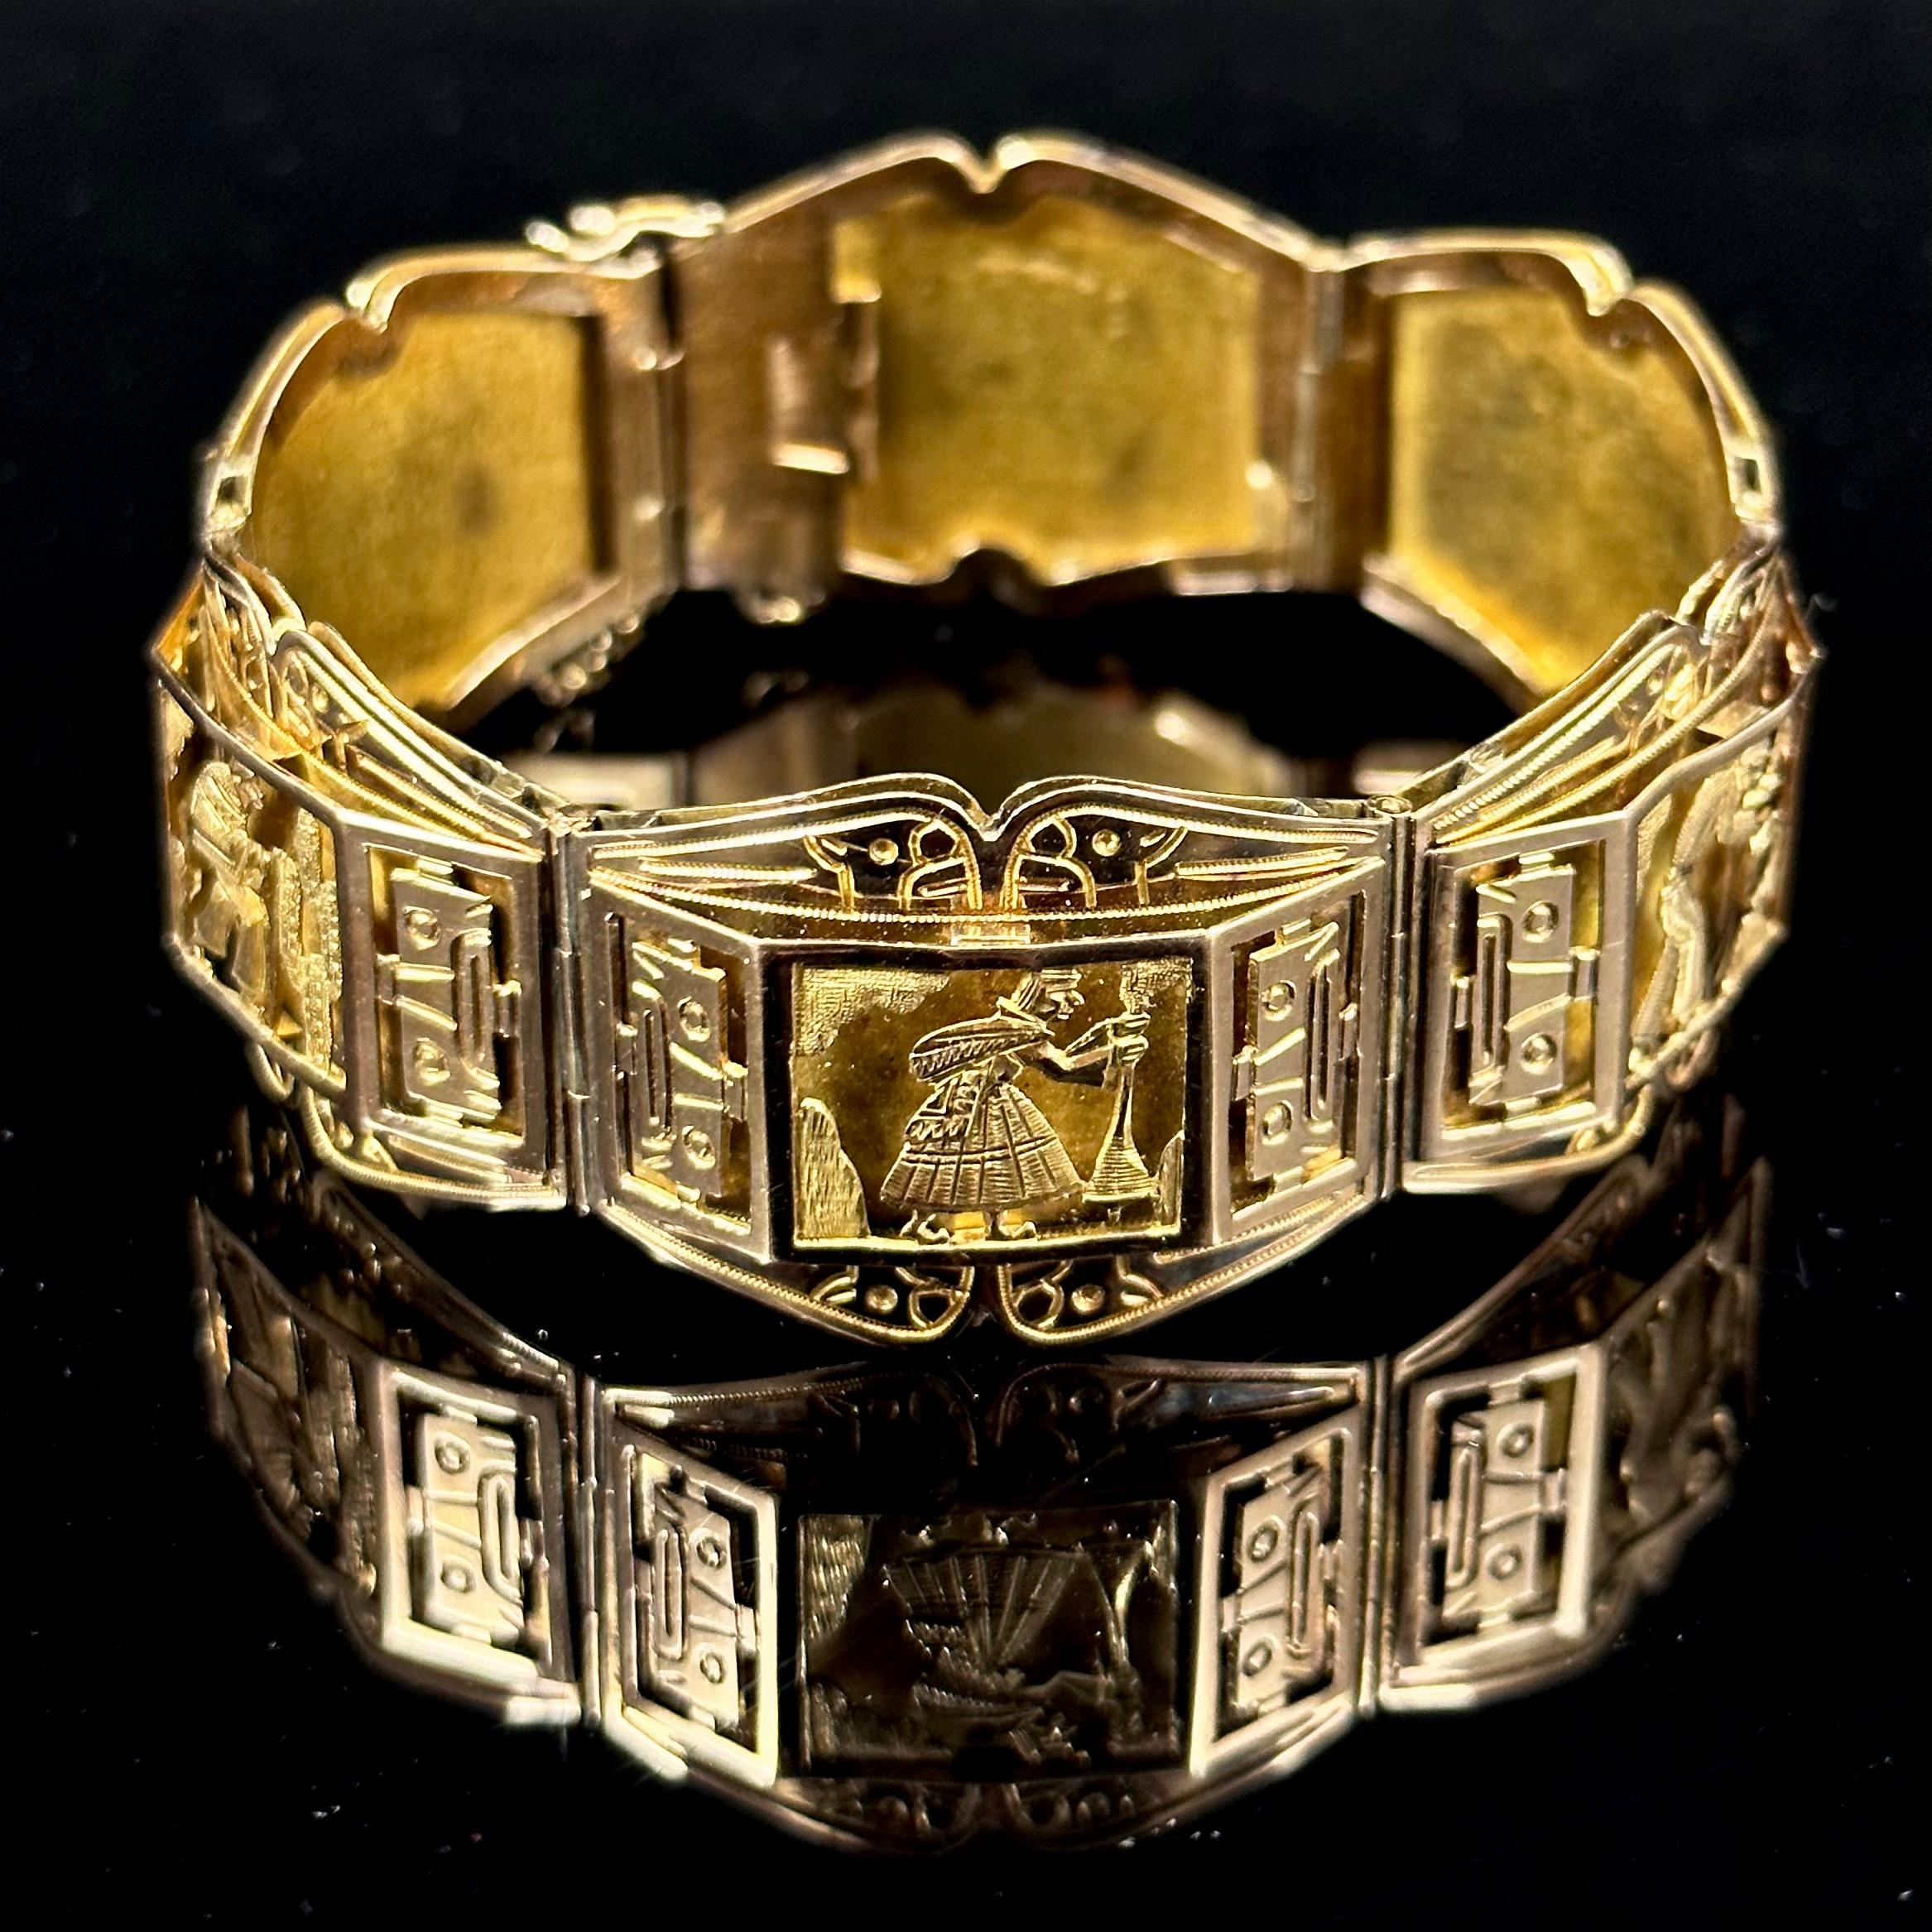 A superb Art Deco storyteller panel link bracelet with Andean indigenous scenes in 18kt rose gold, possibly Peruvian, 1930s. This superb jewel is modeled as a sequence of six oblong panels of scalloped borders with chiseled decoration of traditional